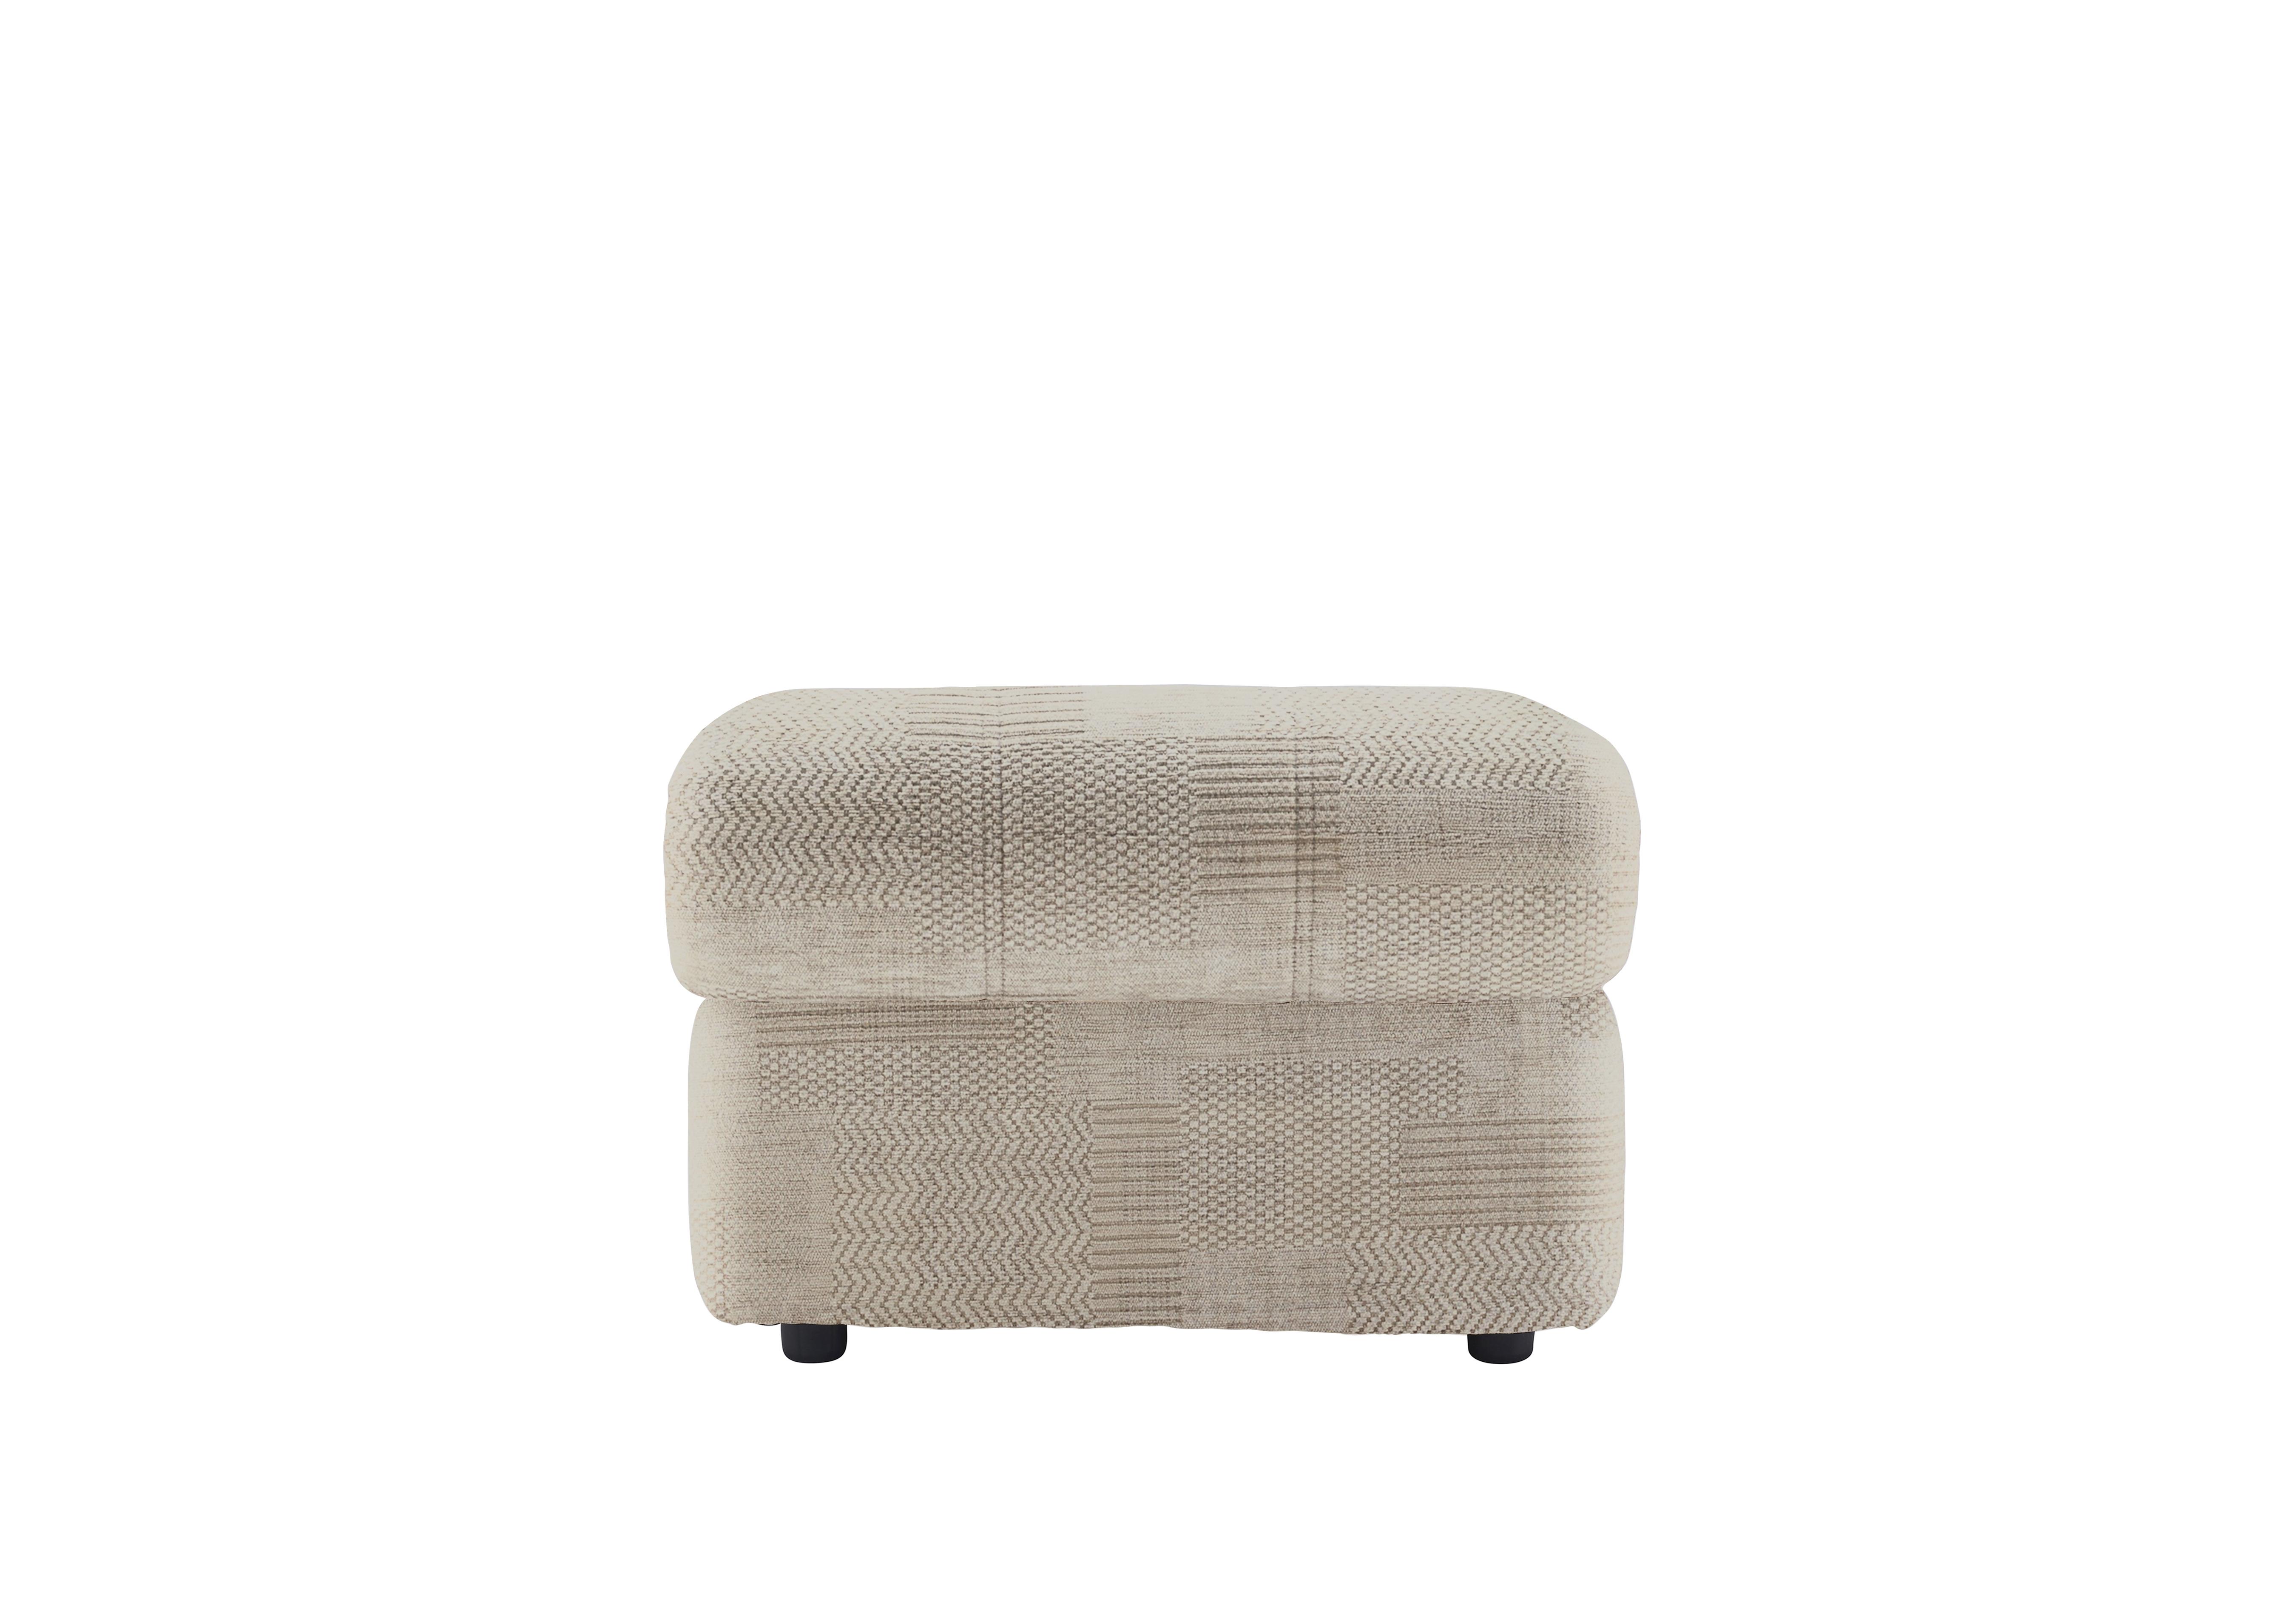 Chloe Fabric Footstool in C008 Checkers Putty on Furniture Village